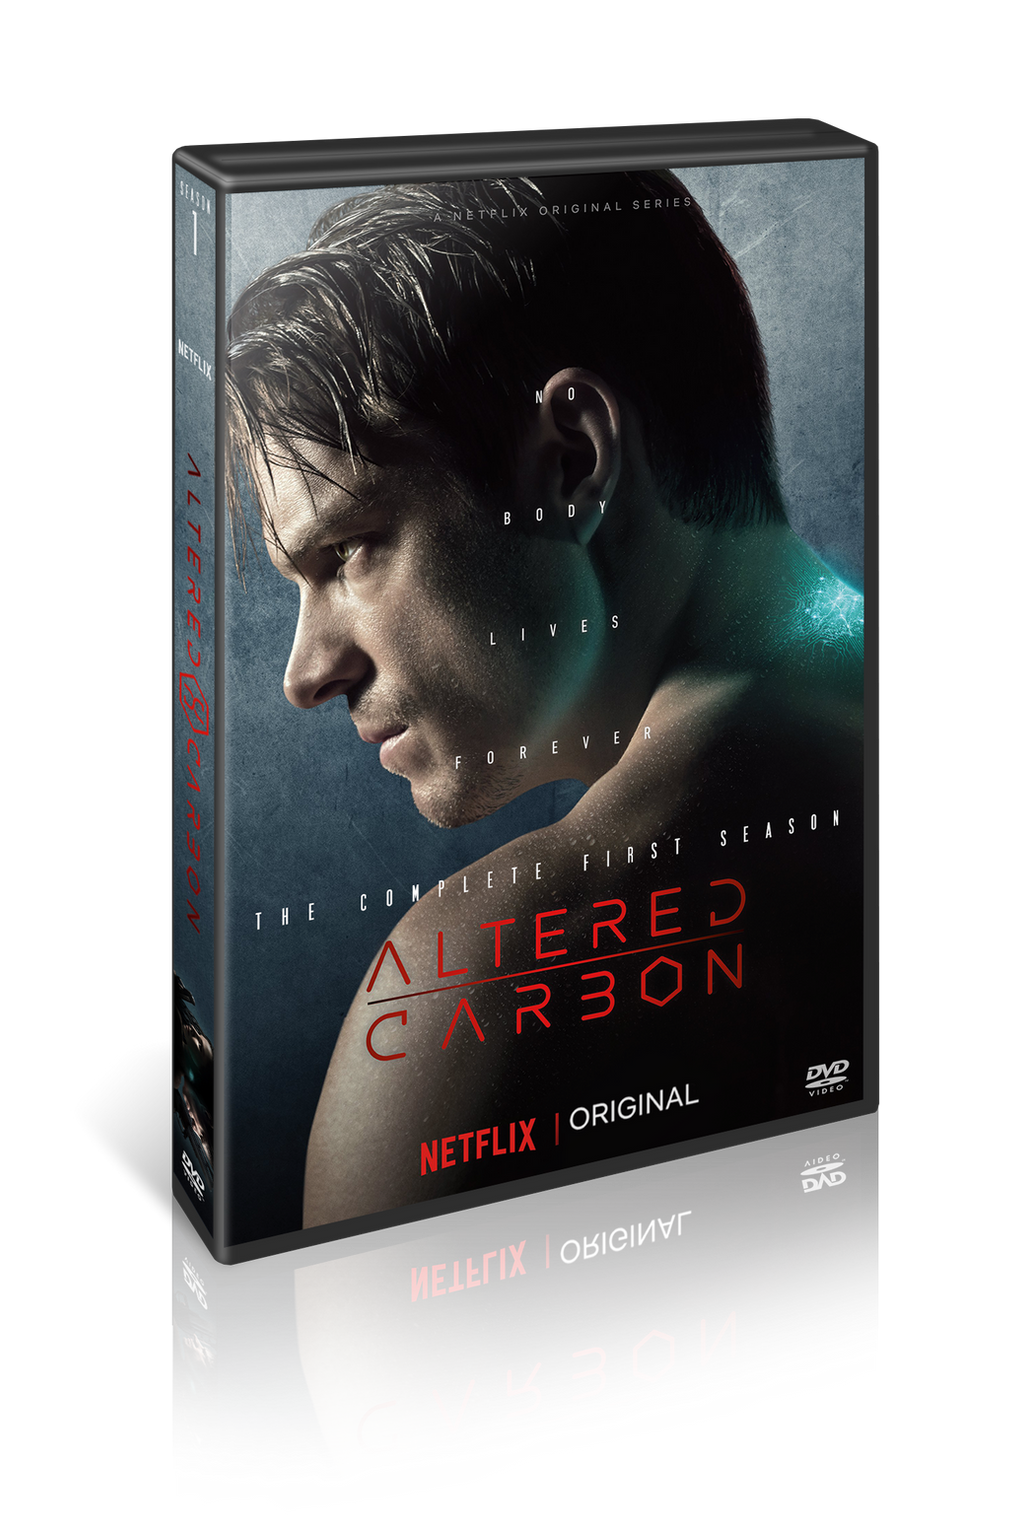 Altered Carbon S01 DVD Cover by szwejzi on DeviantArt